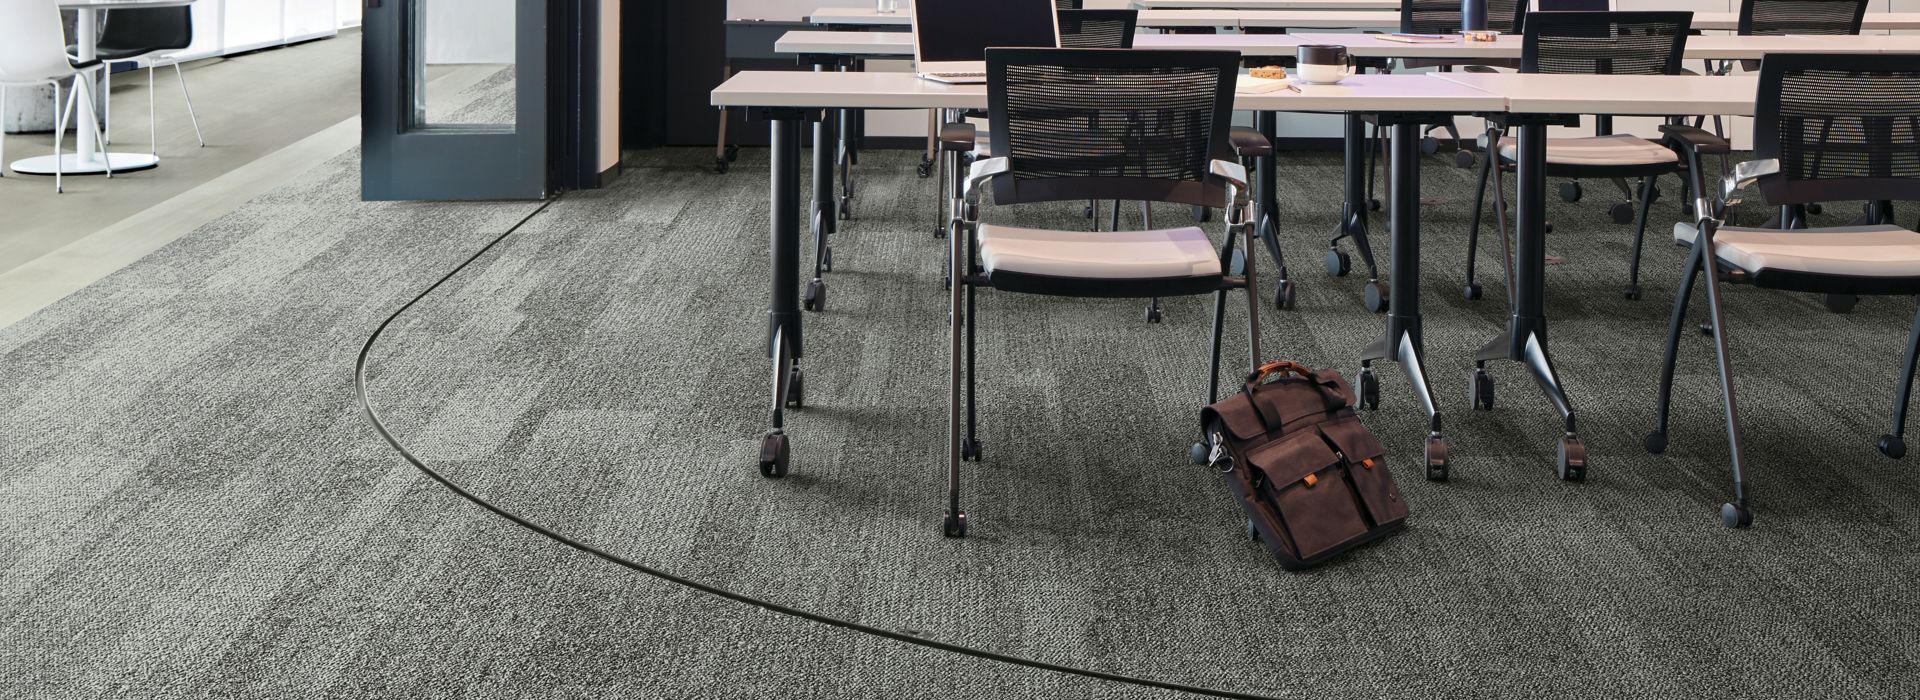 Interface Open Air 410 plank carpet tile in open conference room with satchel leaning on chair image number 1